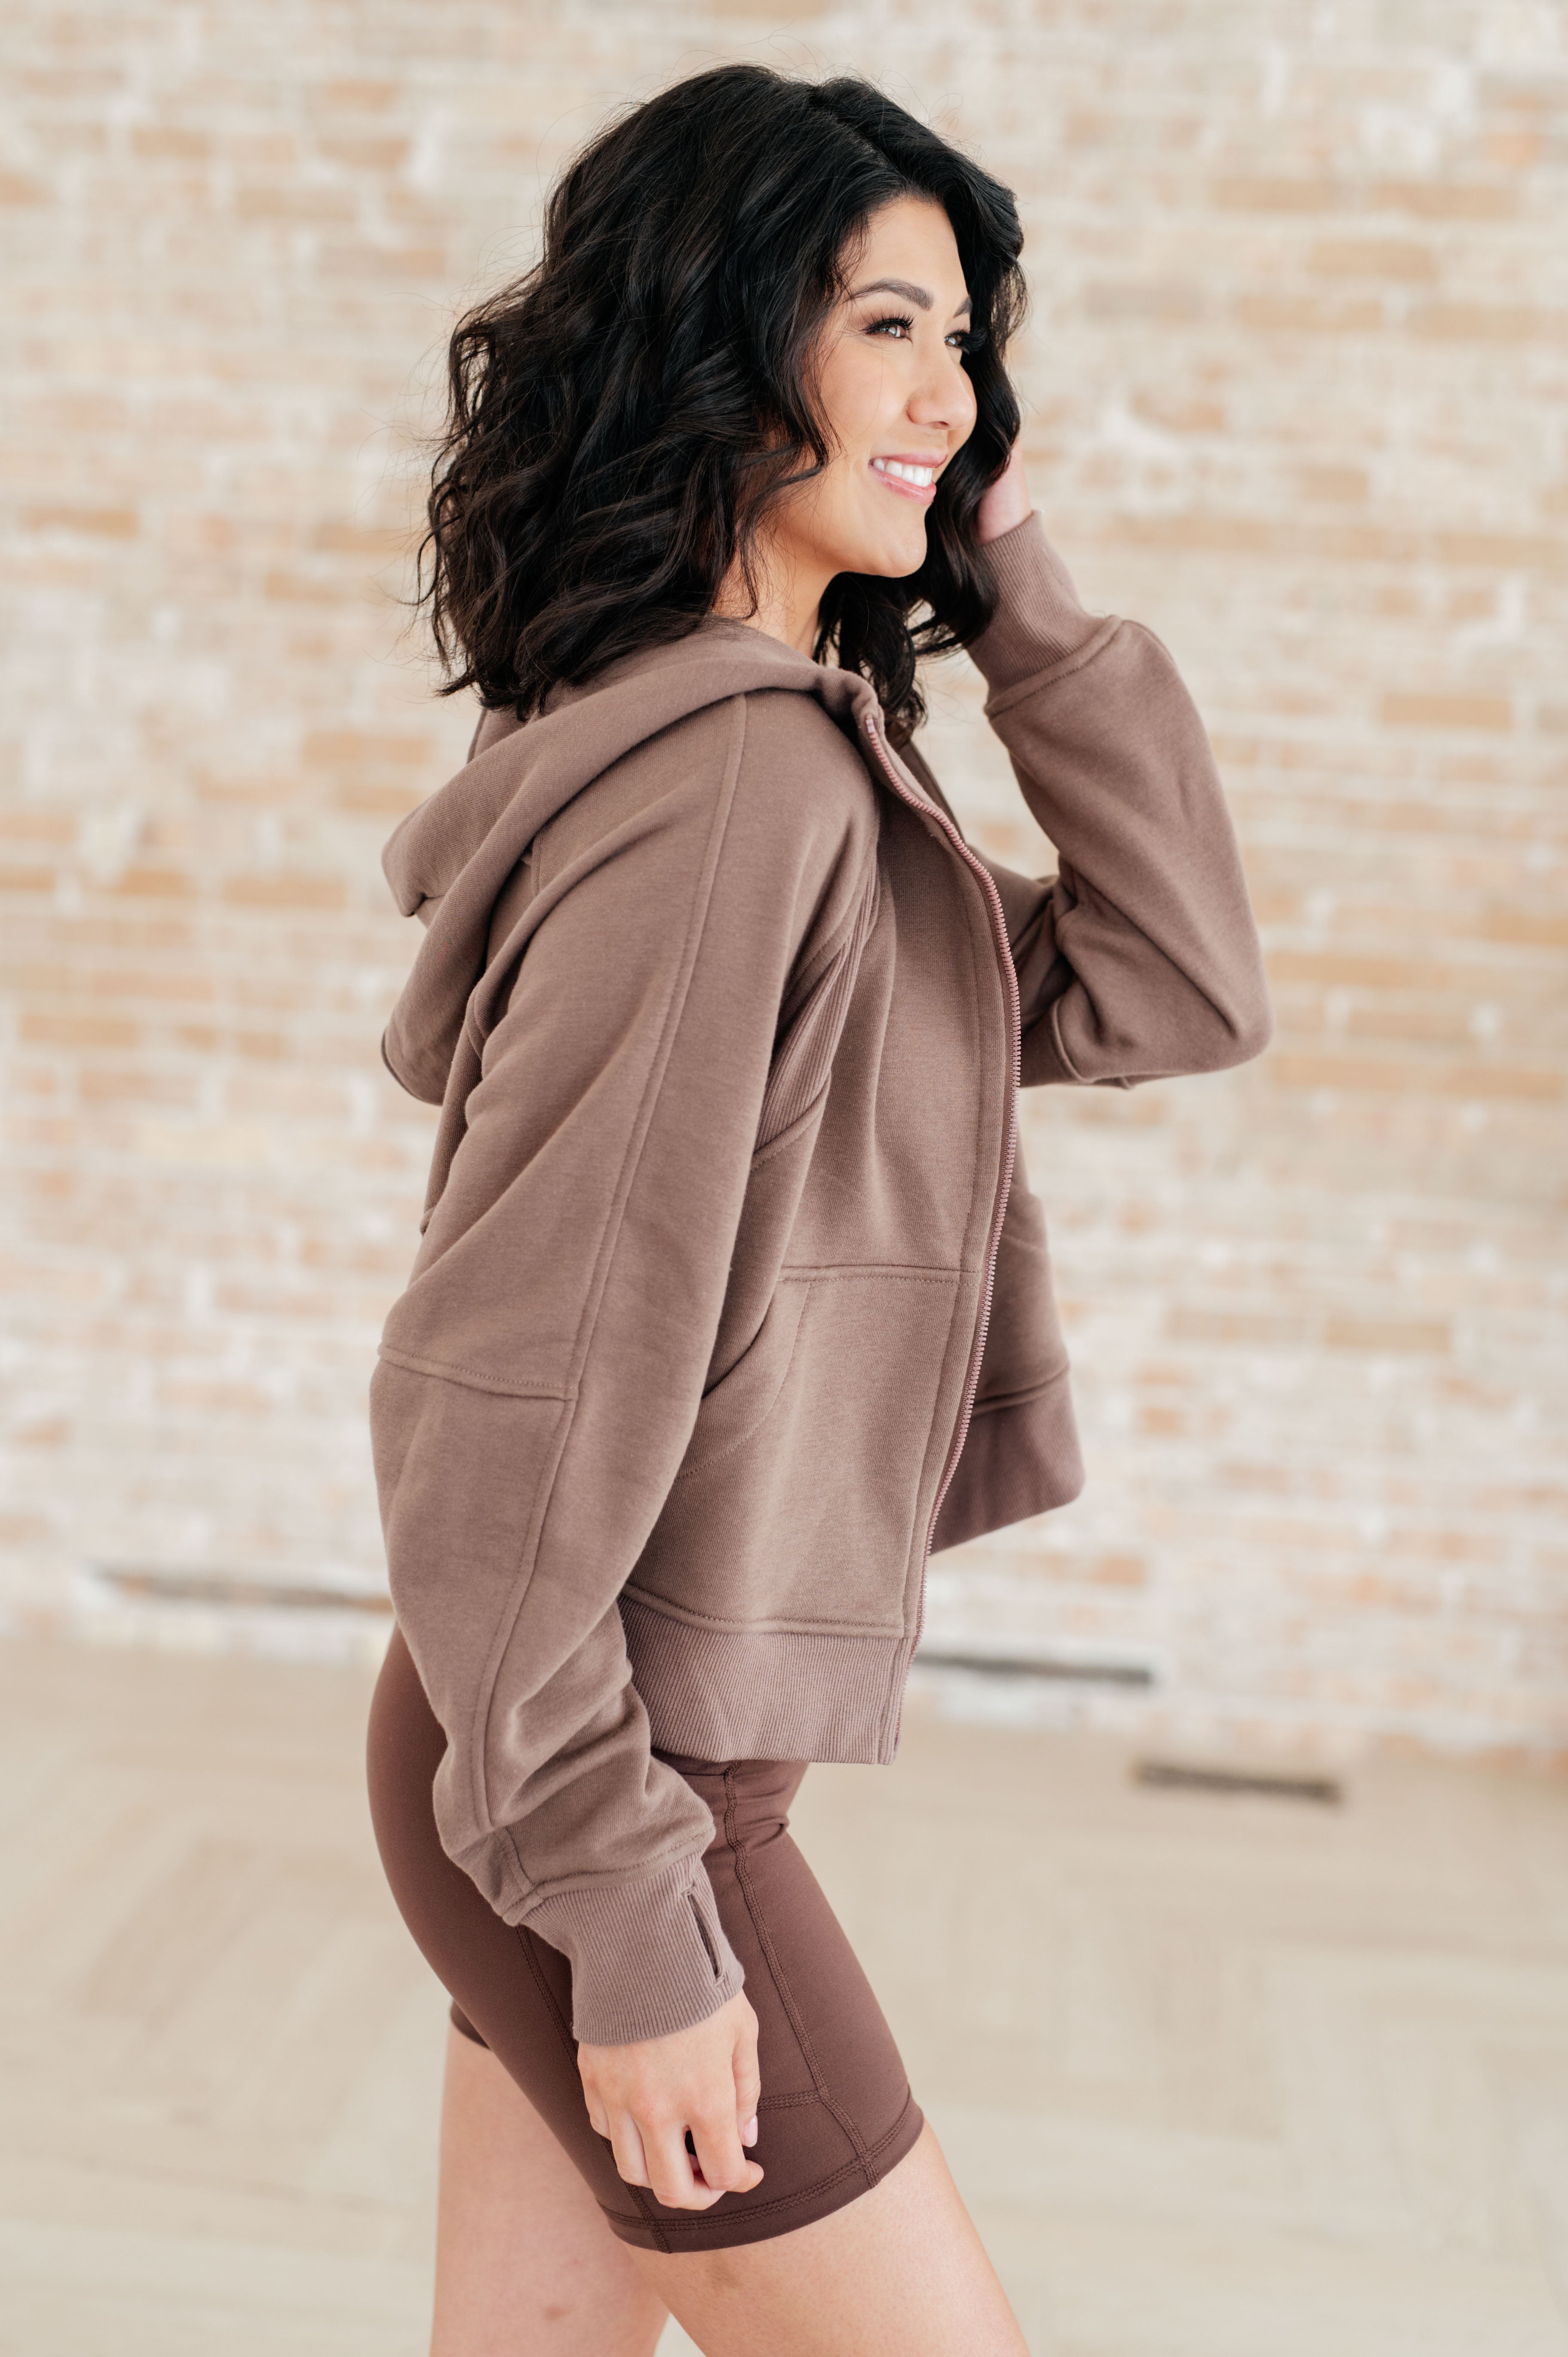 Sun or Shade Zip Up Jacket in Smokey Brown Athleisure Ave Shops   